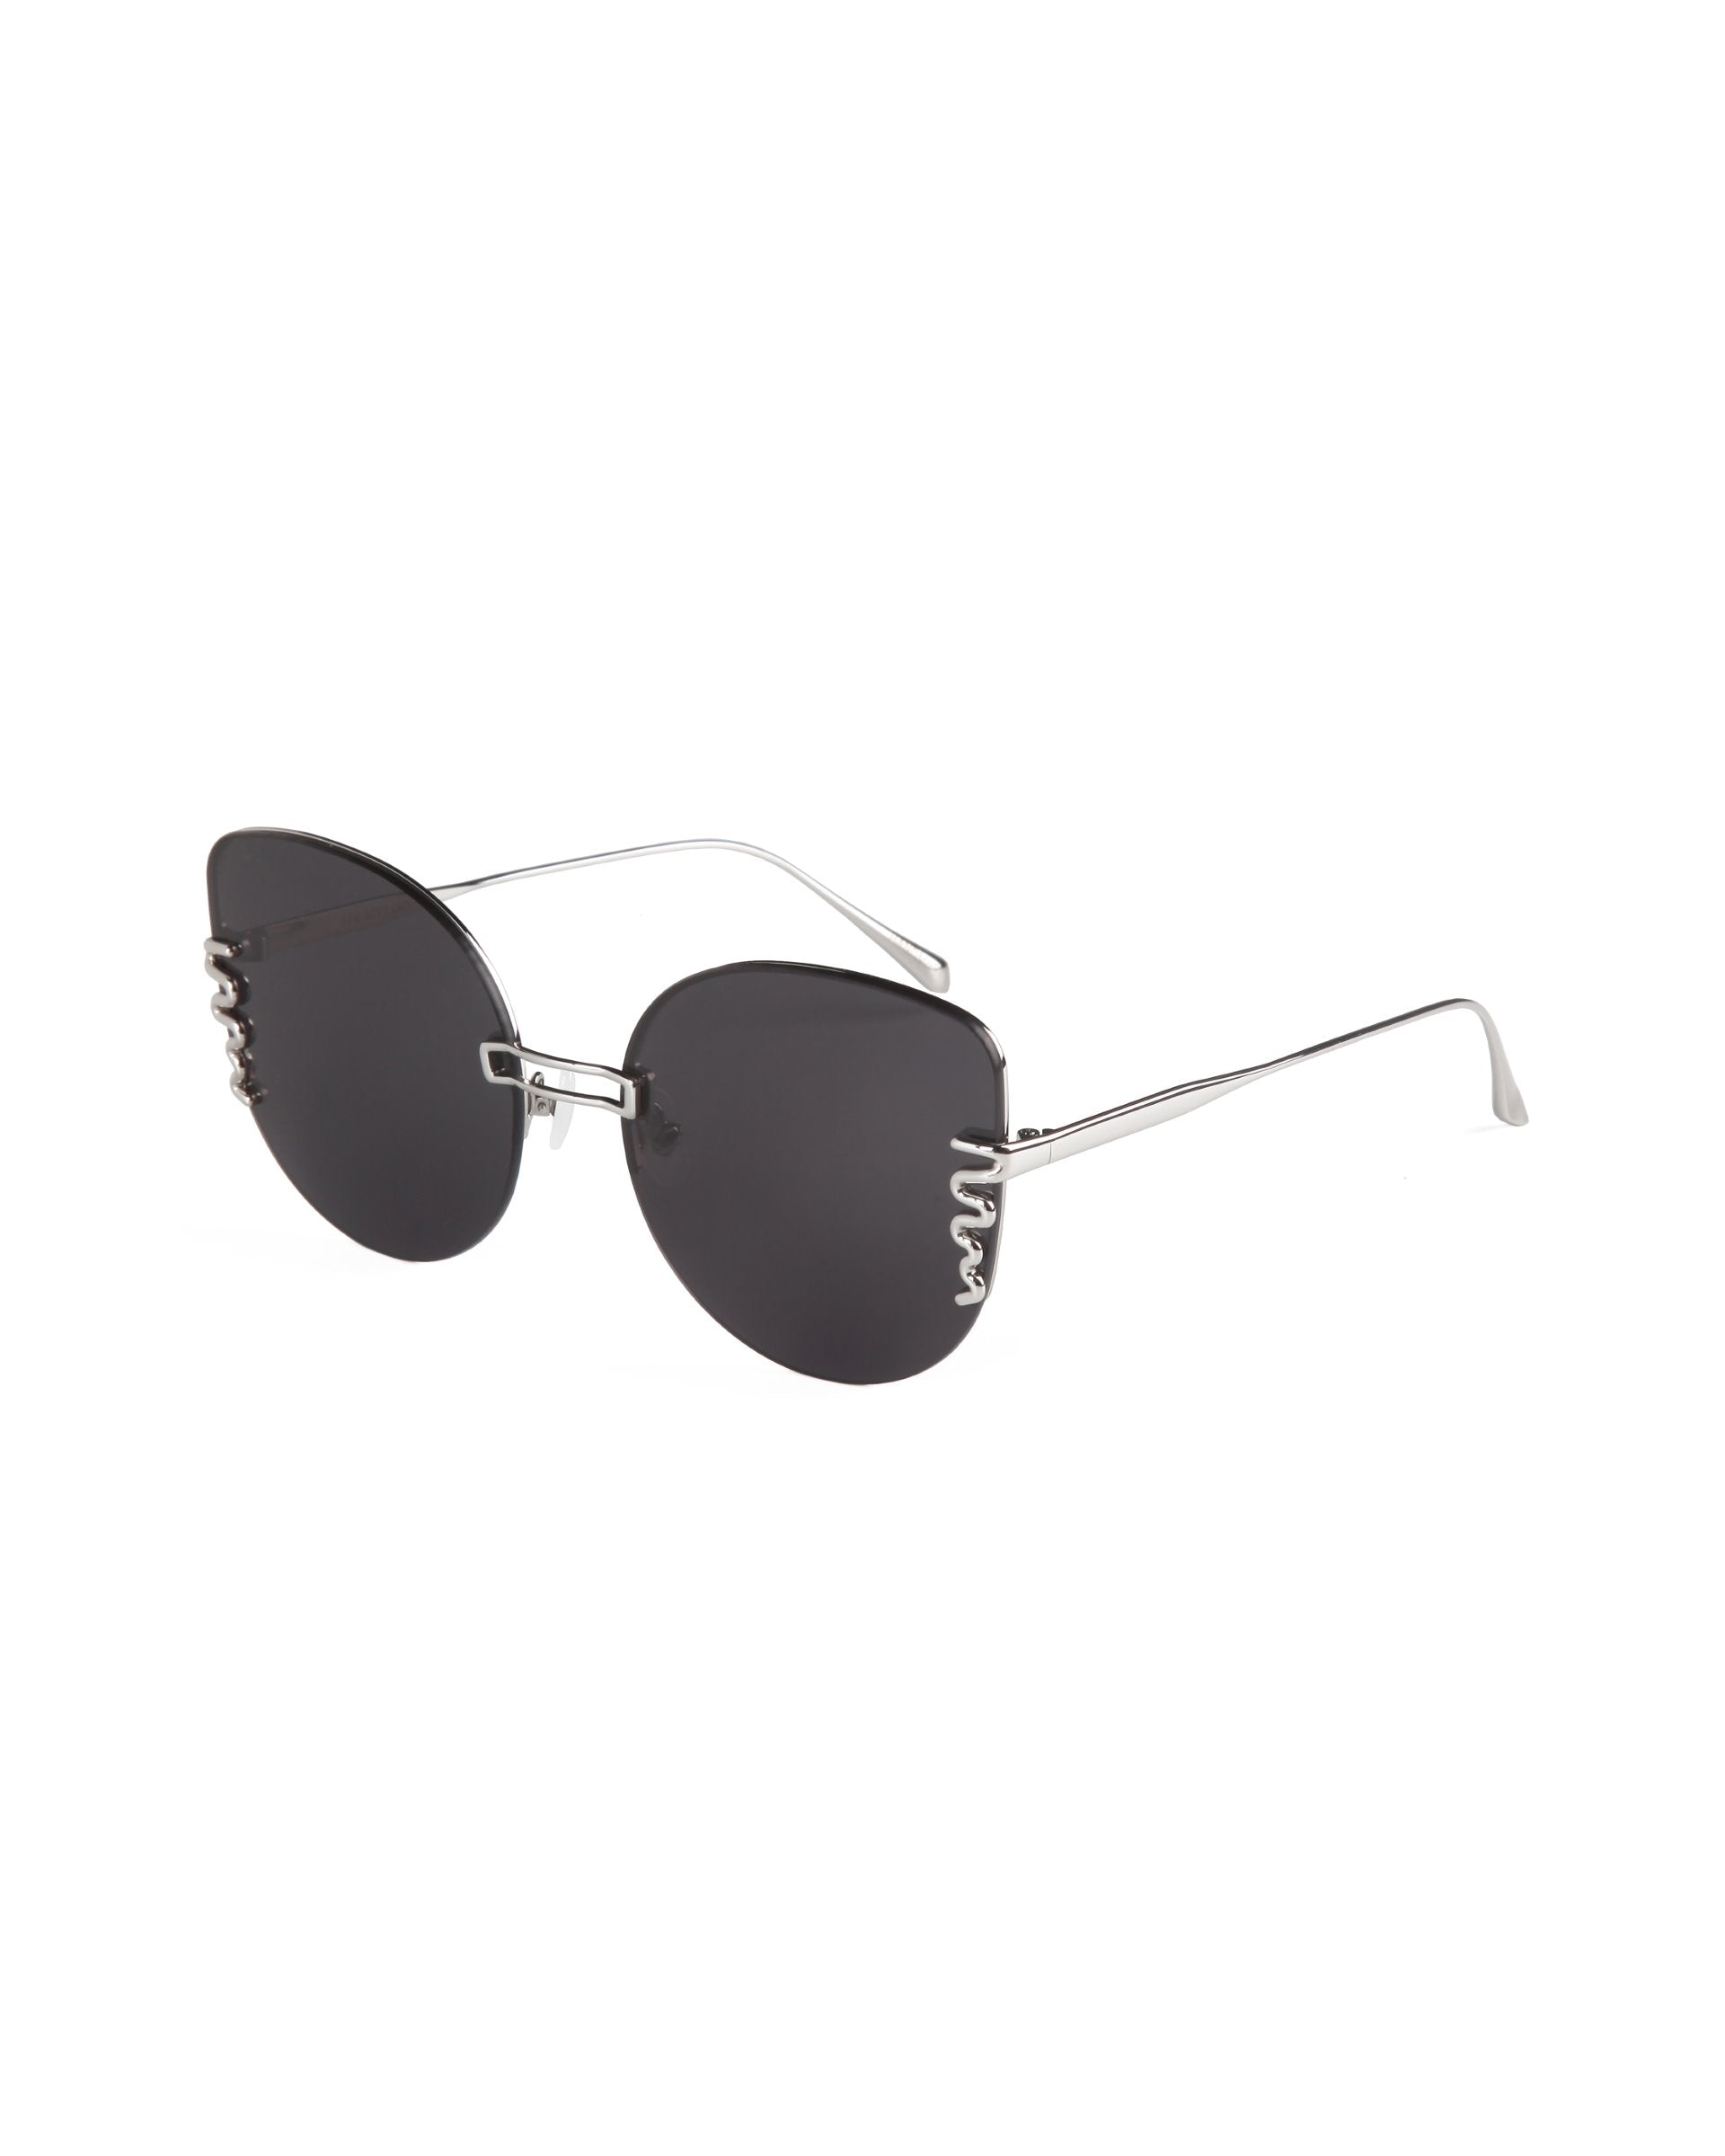 A pair of For Art&#39;s Sake® Girlboss sunglasses with round, dark-tinted lenses and thin, silver metal frames featuring a unique wavy design near the hinges. The slender arms extend straight back, and the adjustable nosepads ensure comfort, all while providing 100% UV protection.